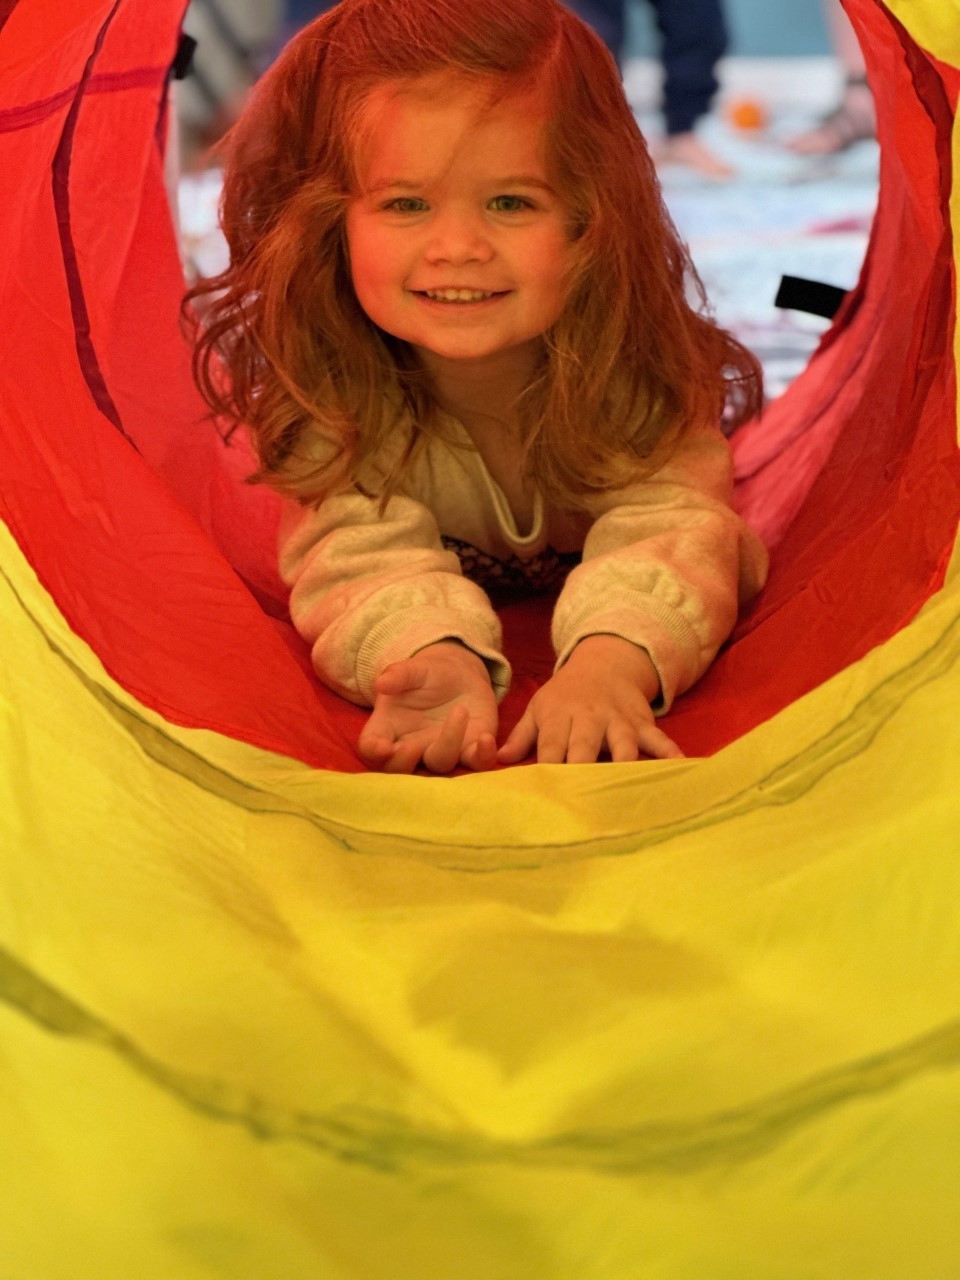 Child playing in a red and yellow tunnel during story time